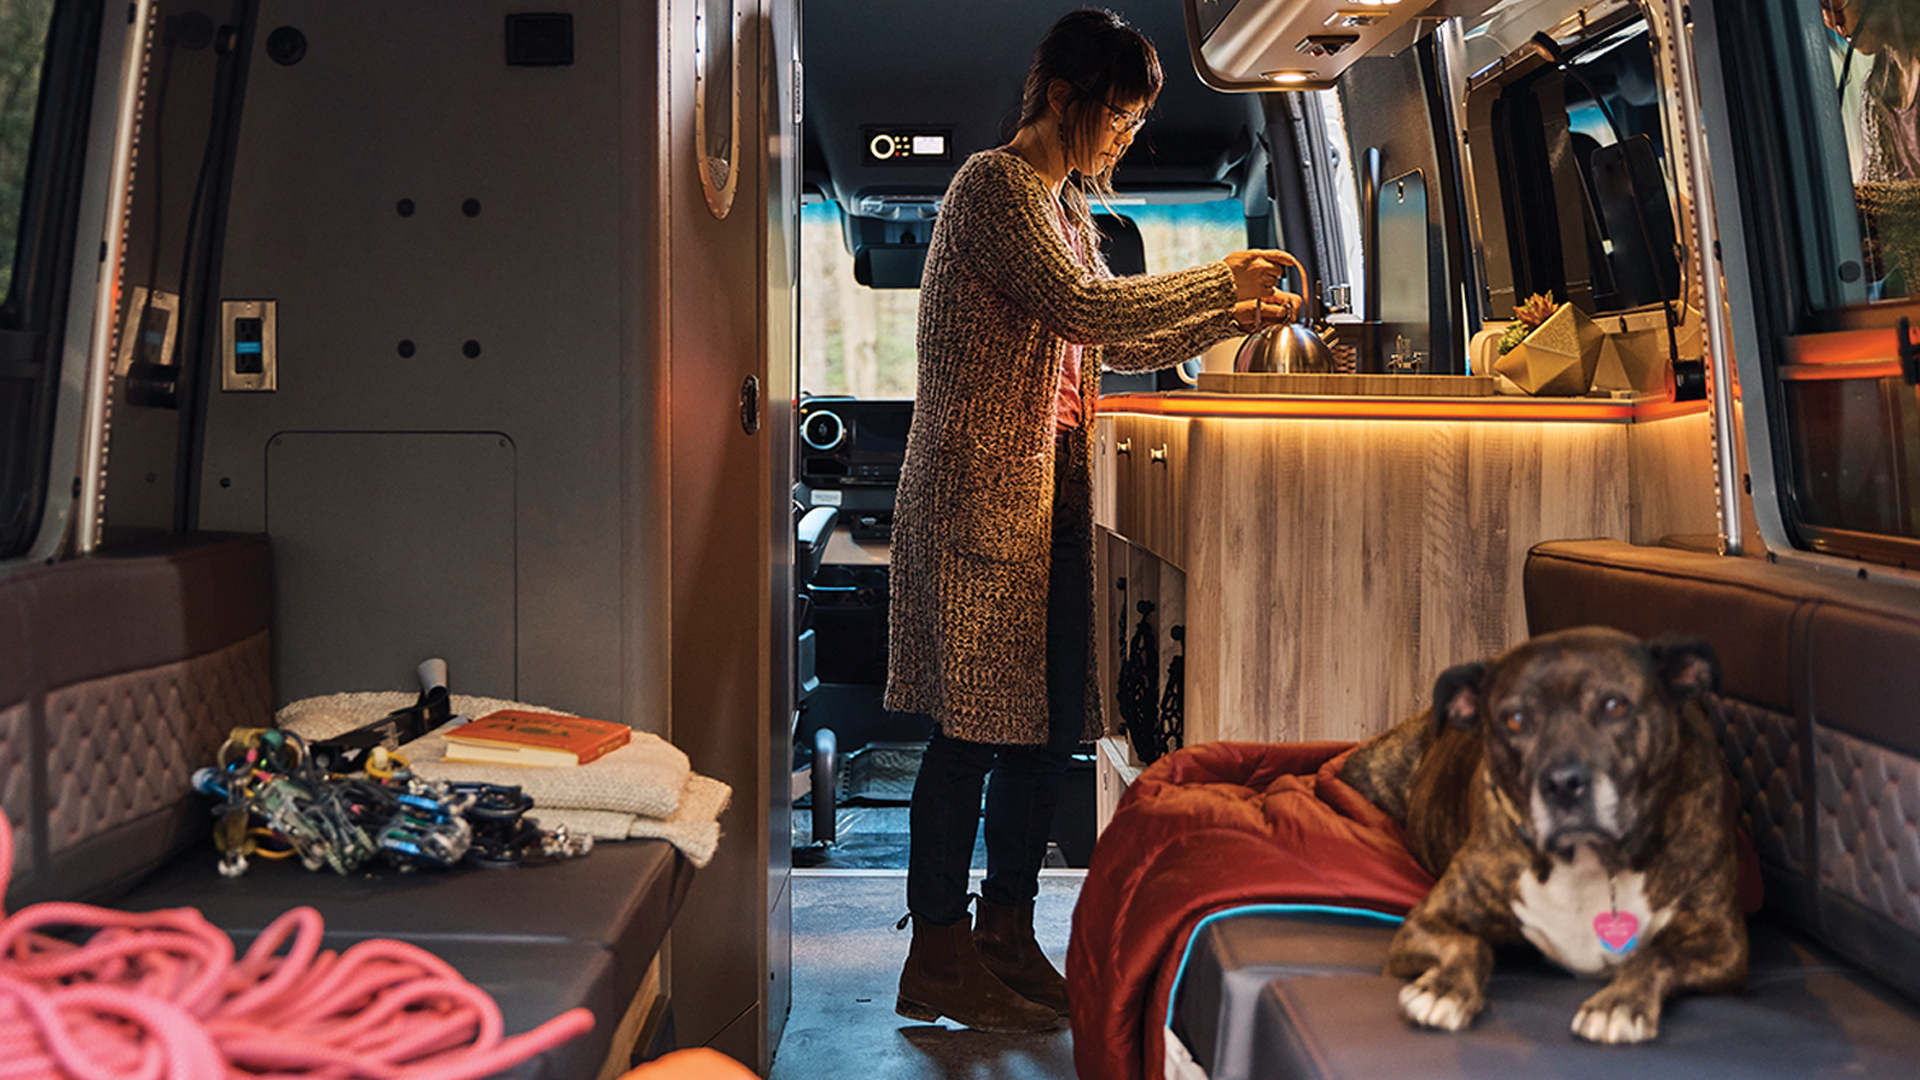 A woman cooking on the stove of her Airstream Interstate 24X